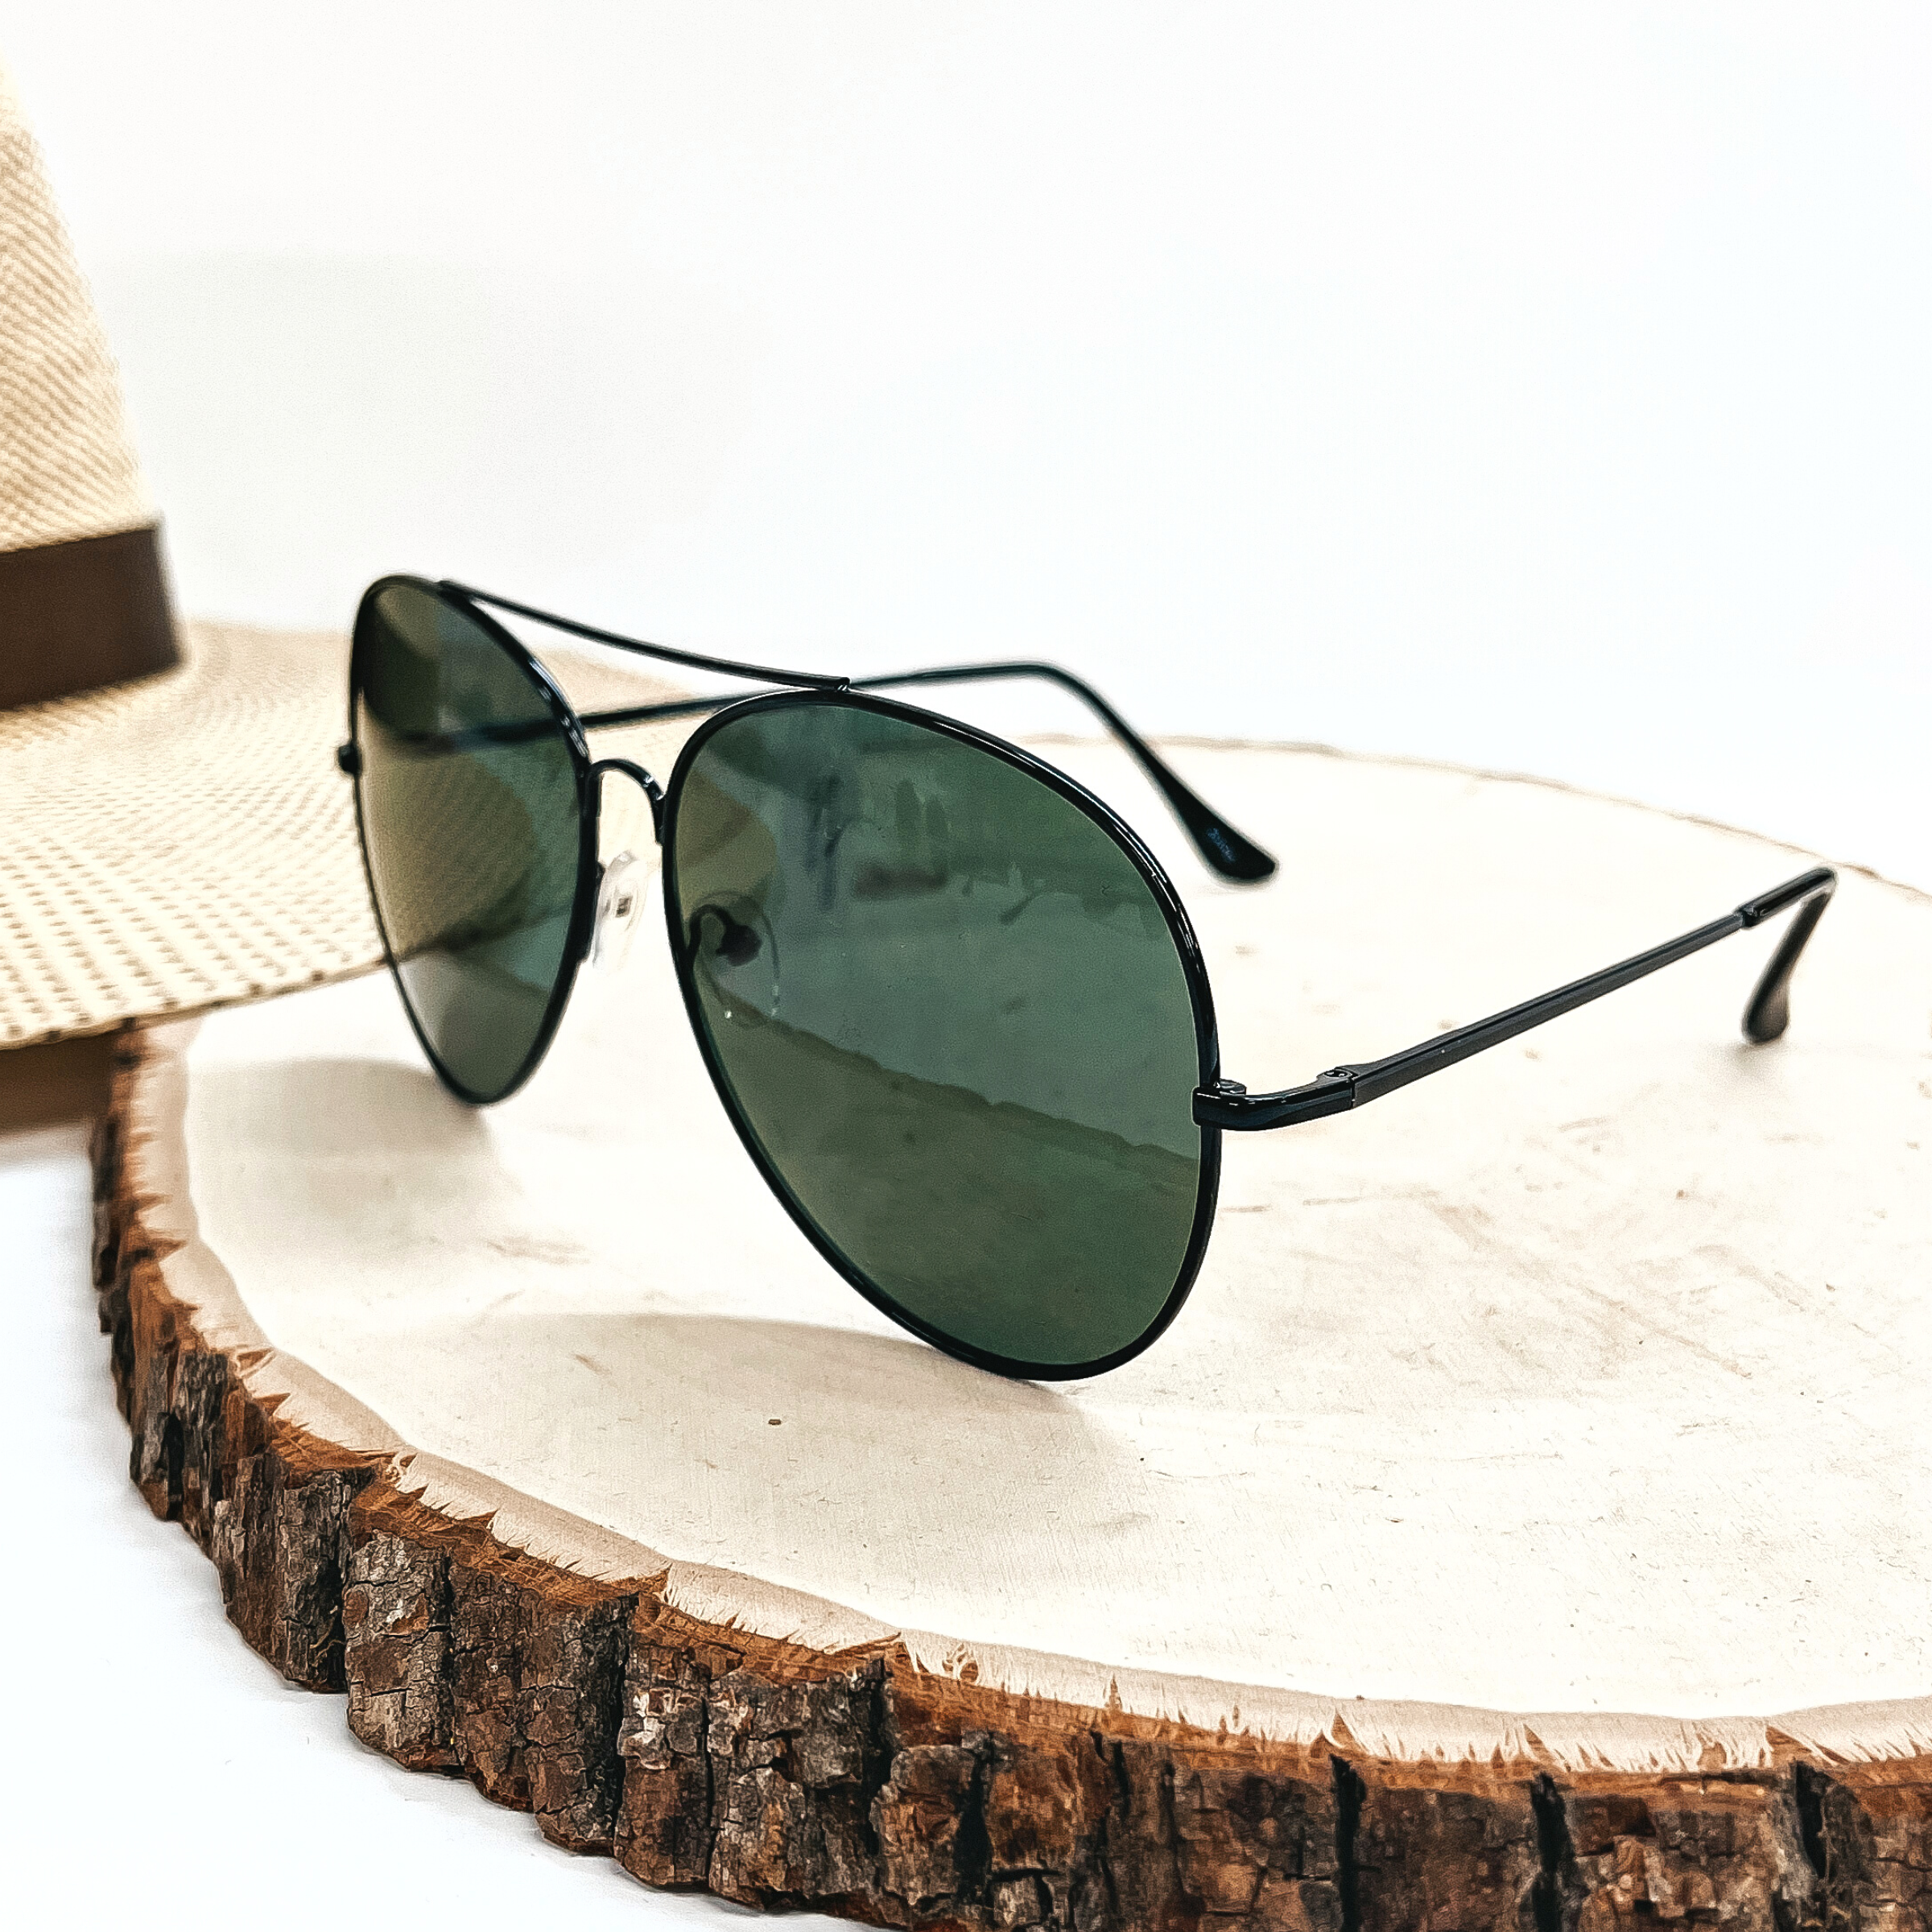 These are aviator style sunglasses with a dark green lense and a black  outline/frame. These sunglasses are taken on top of a slab of wood with a  straw hat in the back as decor.